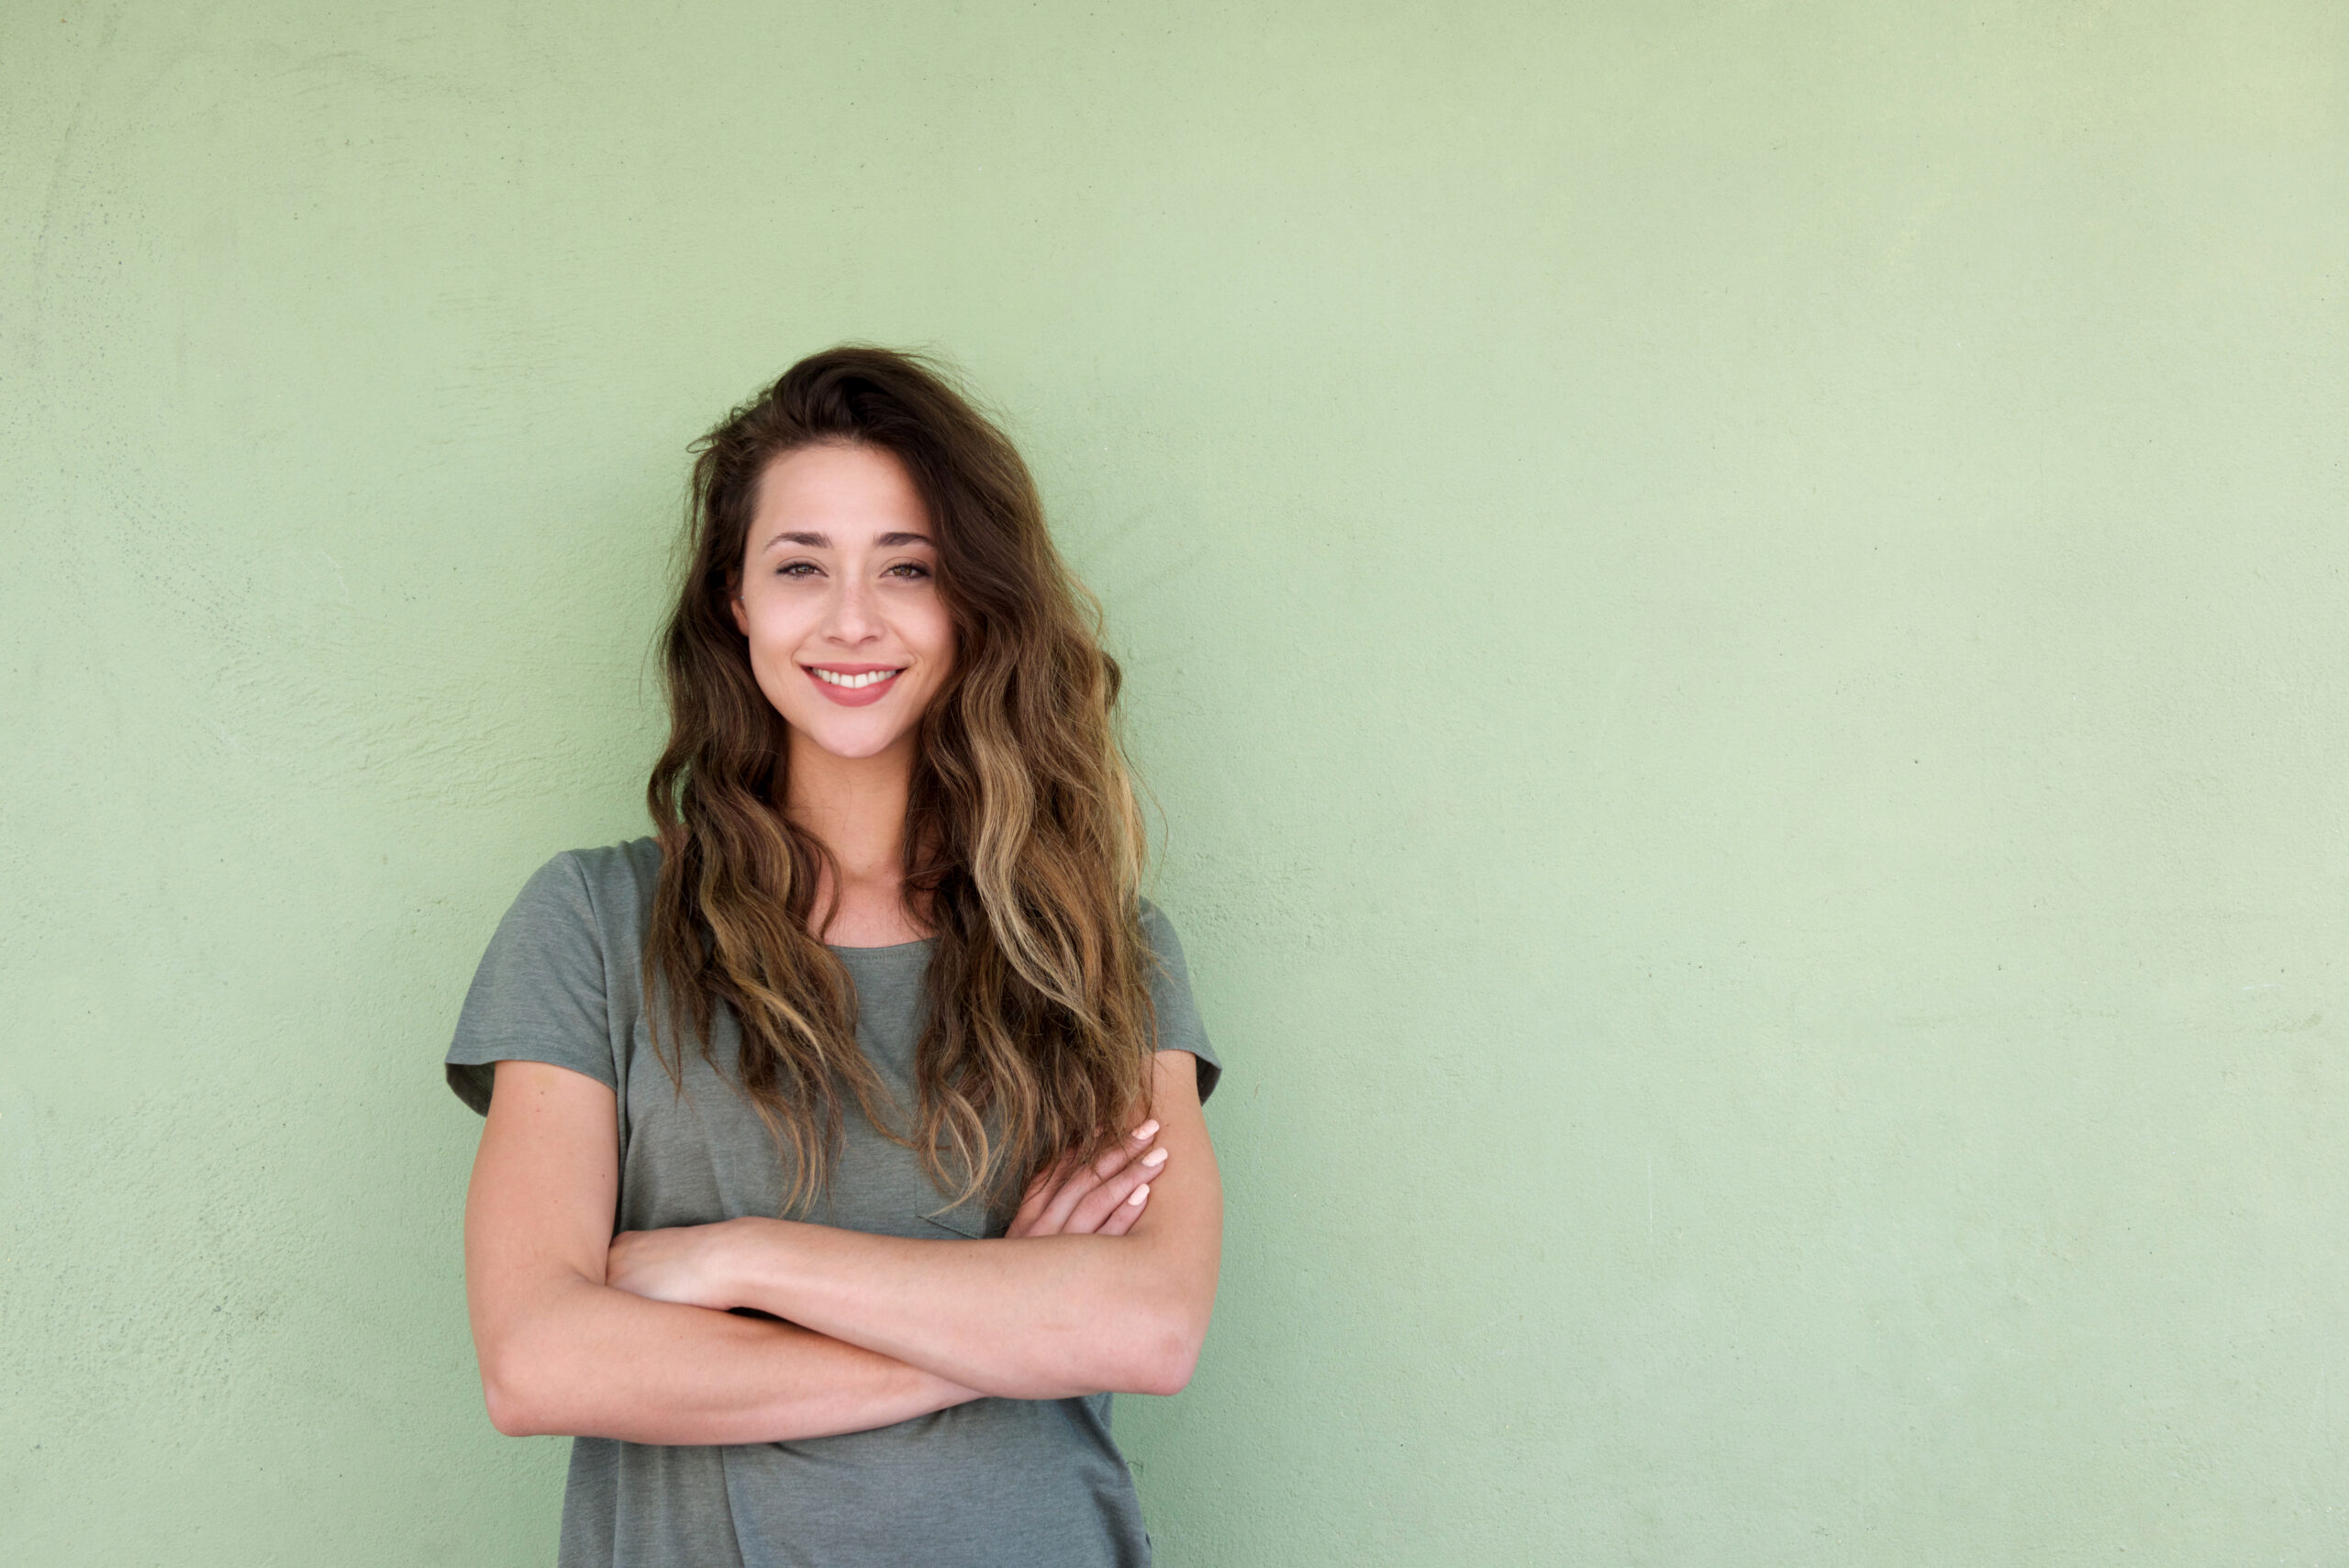 Family Reunion - young smiling woman with arms crossed against green background